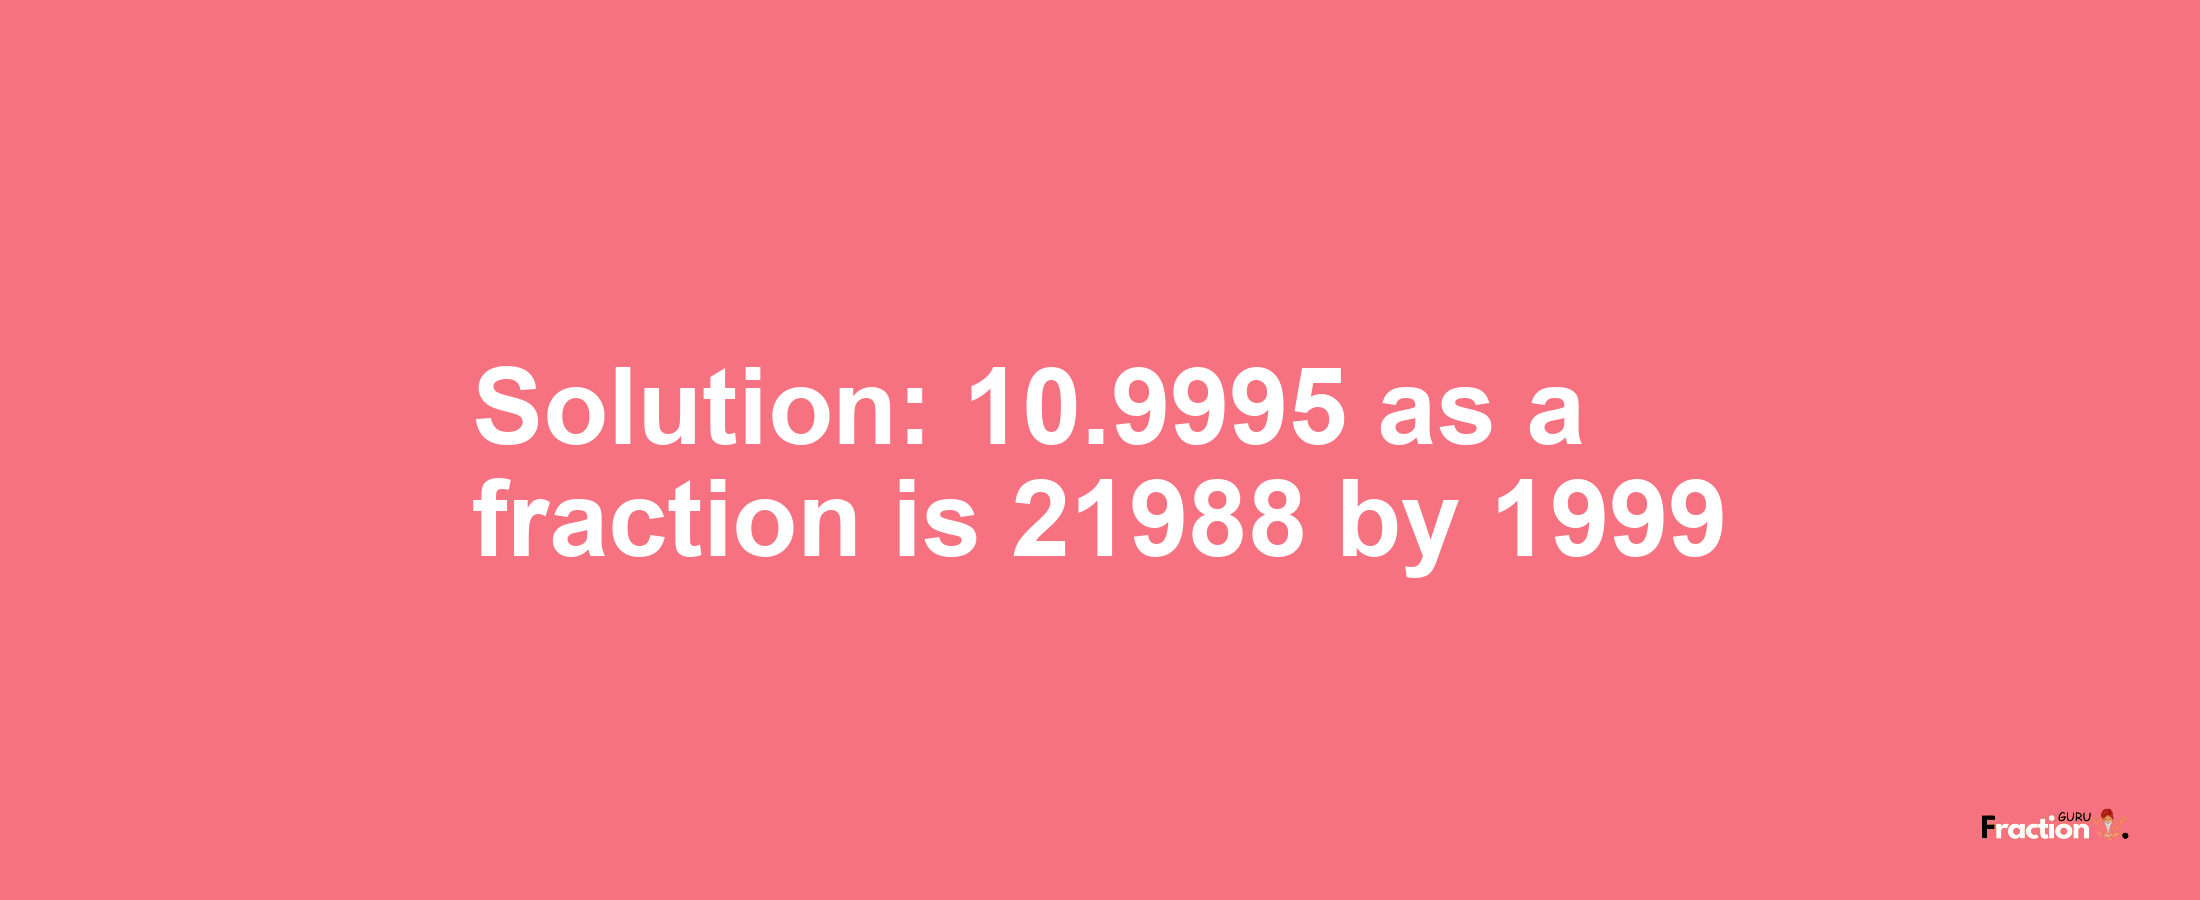 Solution:10.9995 as a fraction is 21988/1999